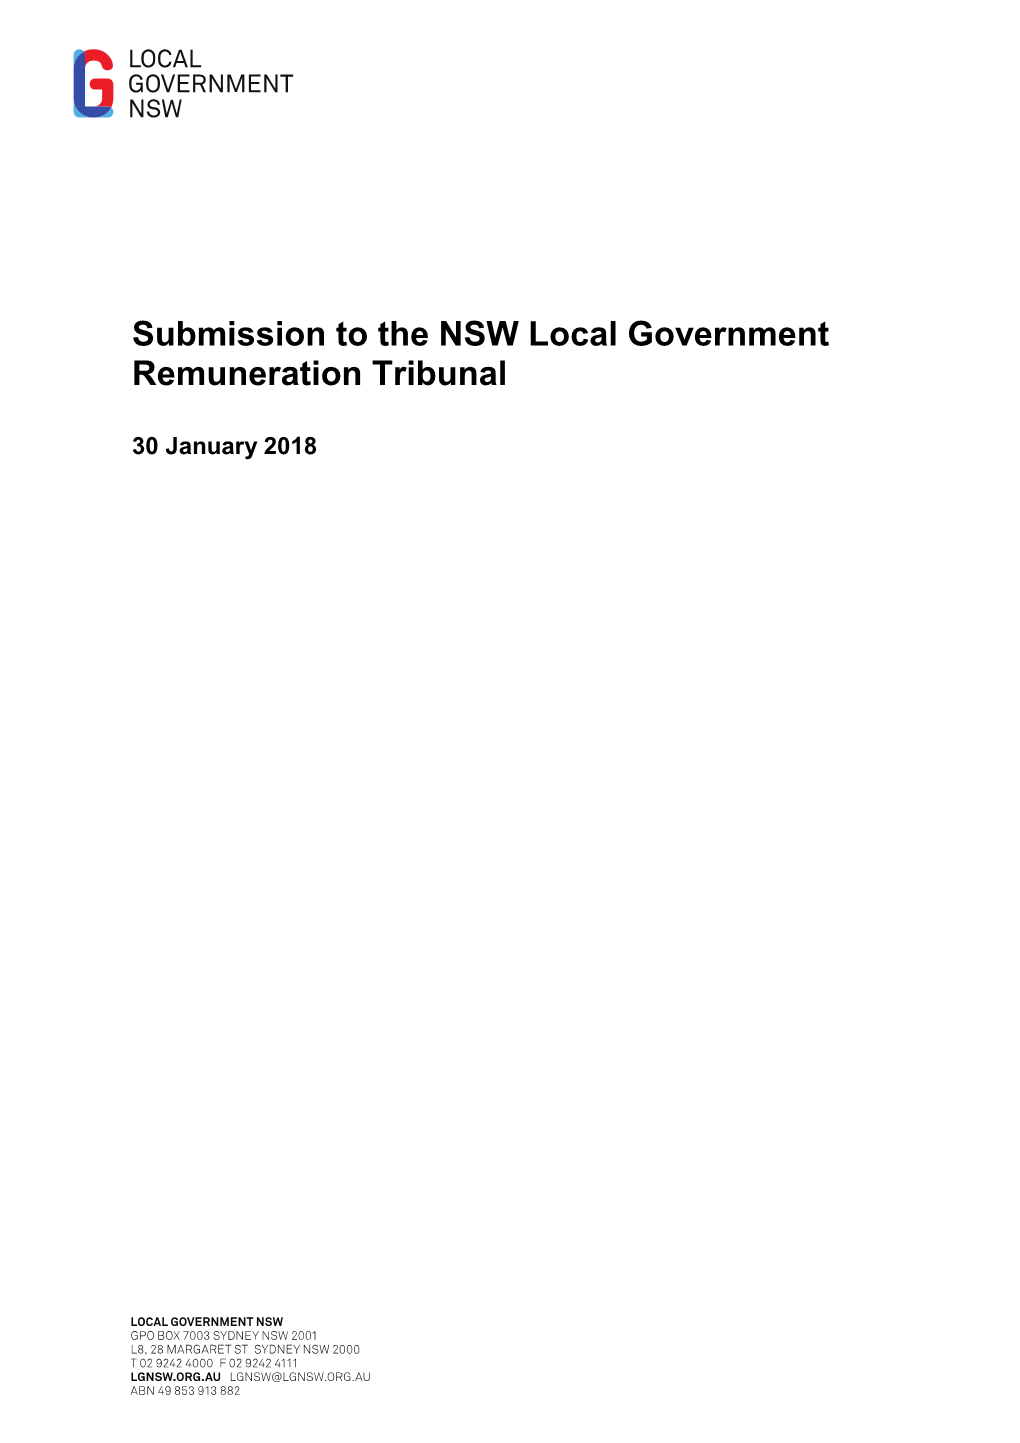 Submission to the NSW Local Government Remuneration Tribunal